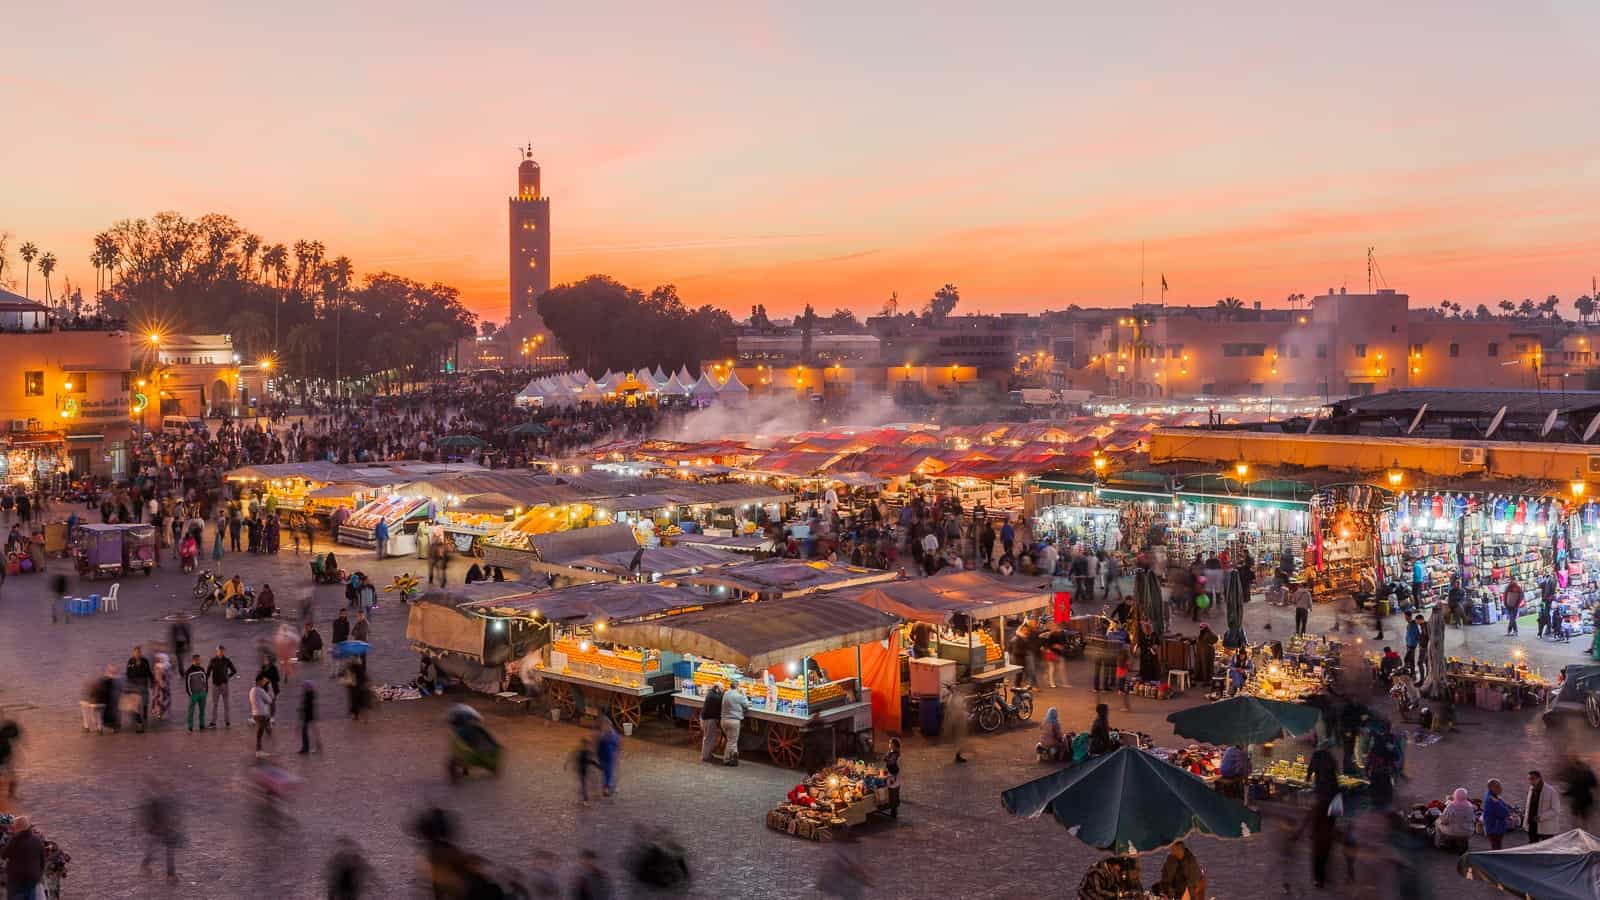 What To Do In Marrakech?